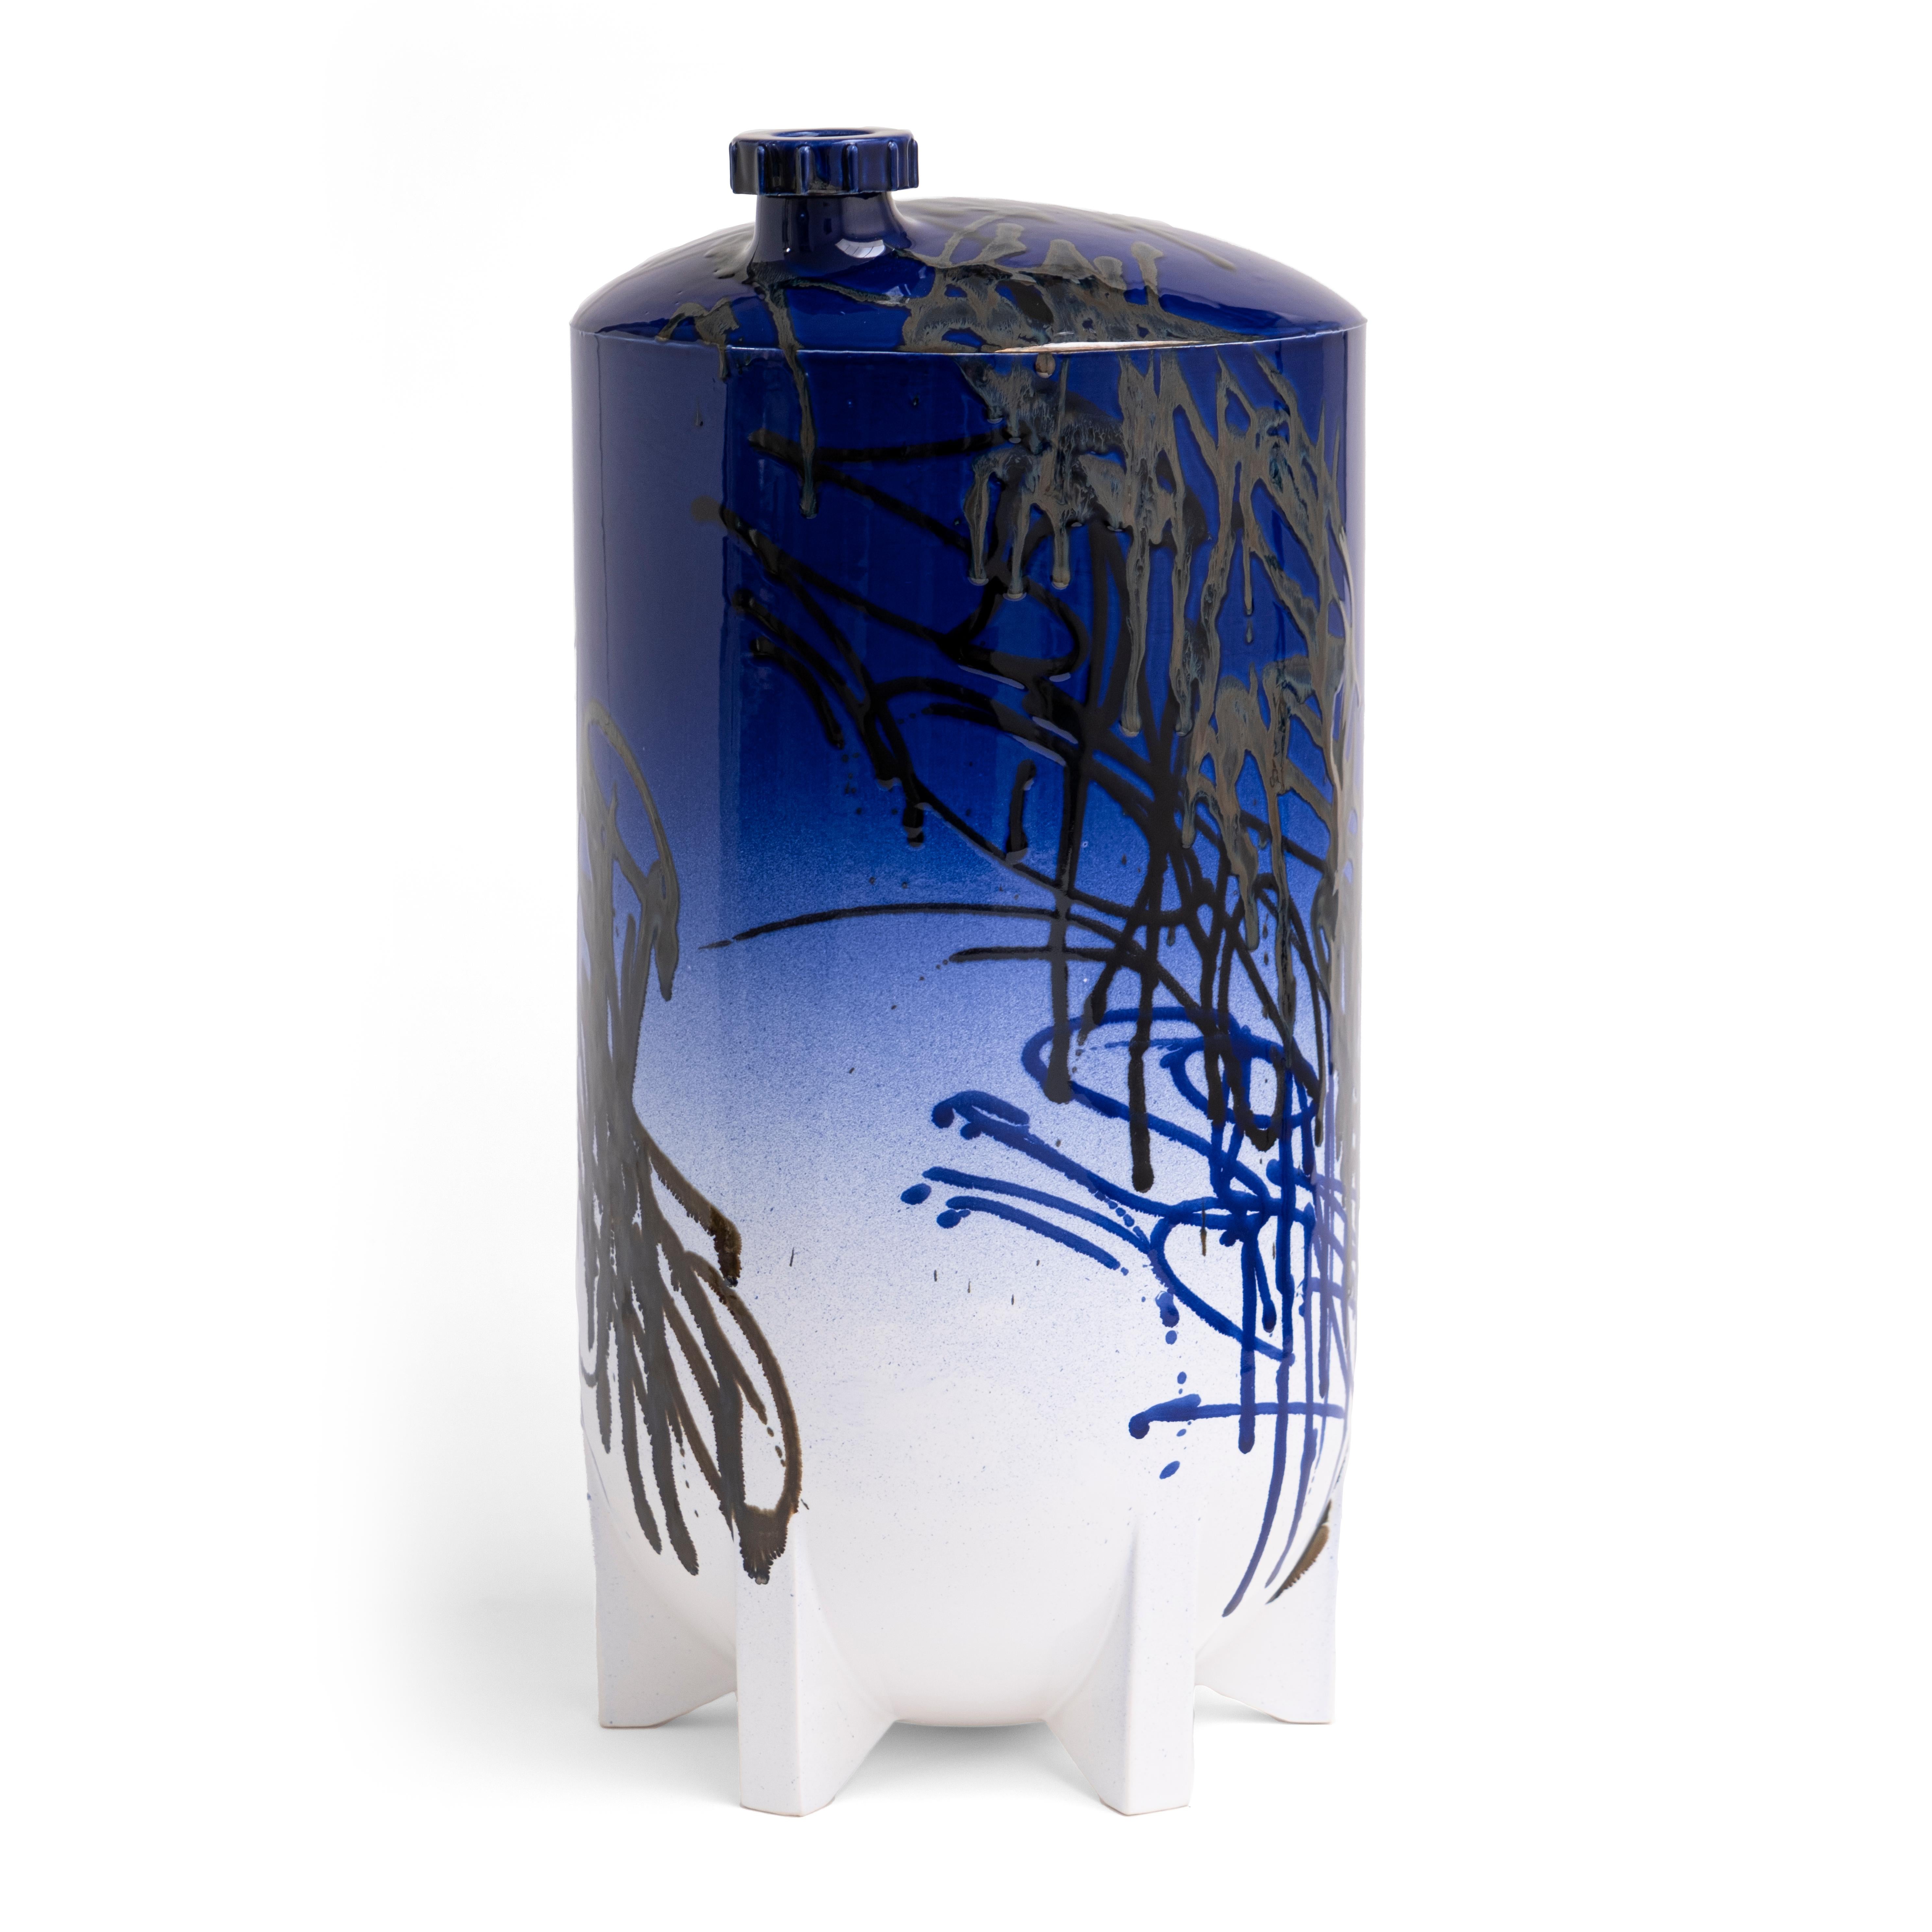 Under pressure 2 by Yuri van Poppel
Dimensions: D 27 x H 55 cm
One of a kind.
Earthenware, layered ceramic glazes, various colours.
Handmade and spray-painted by hand by SunkOne. Removable lid.

Everlasting graffiti spray-painted with ceramic